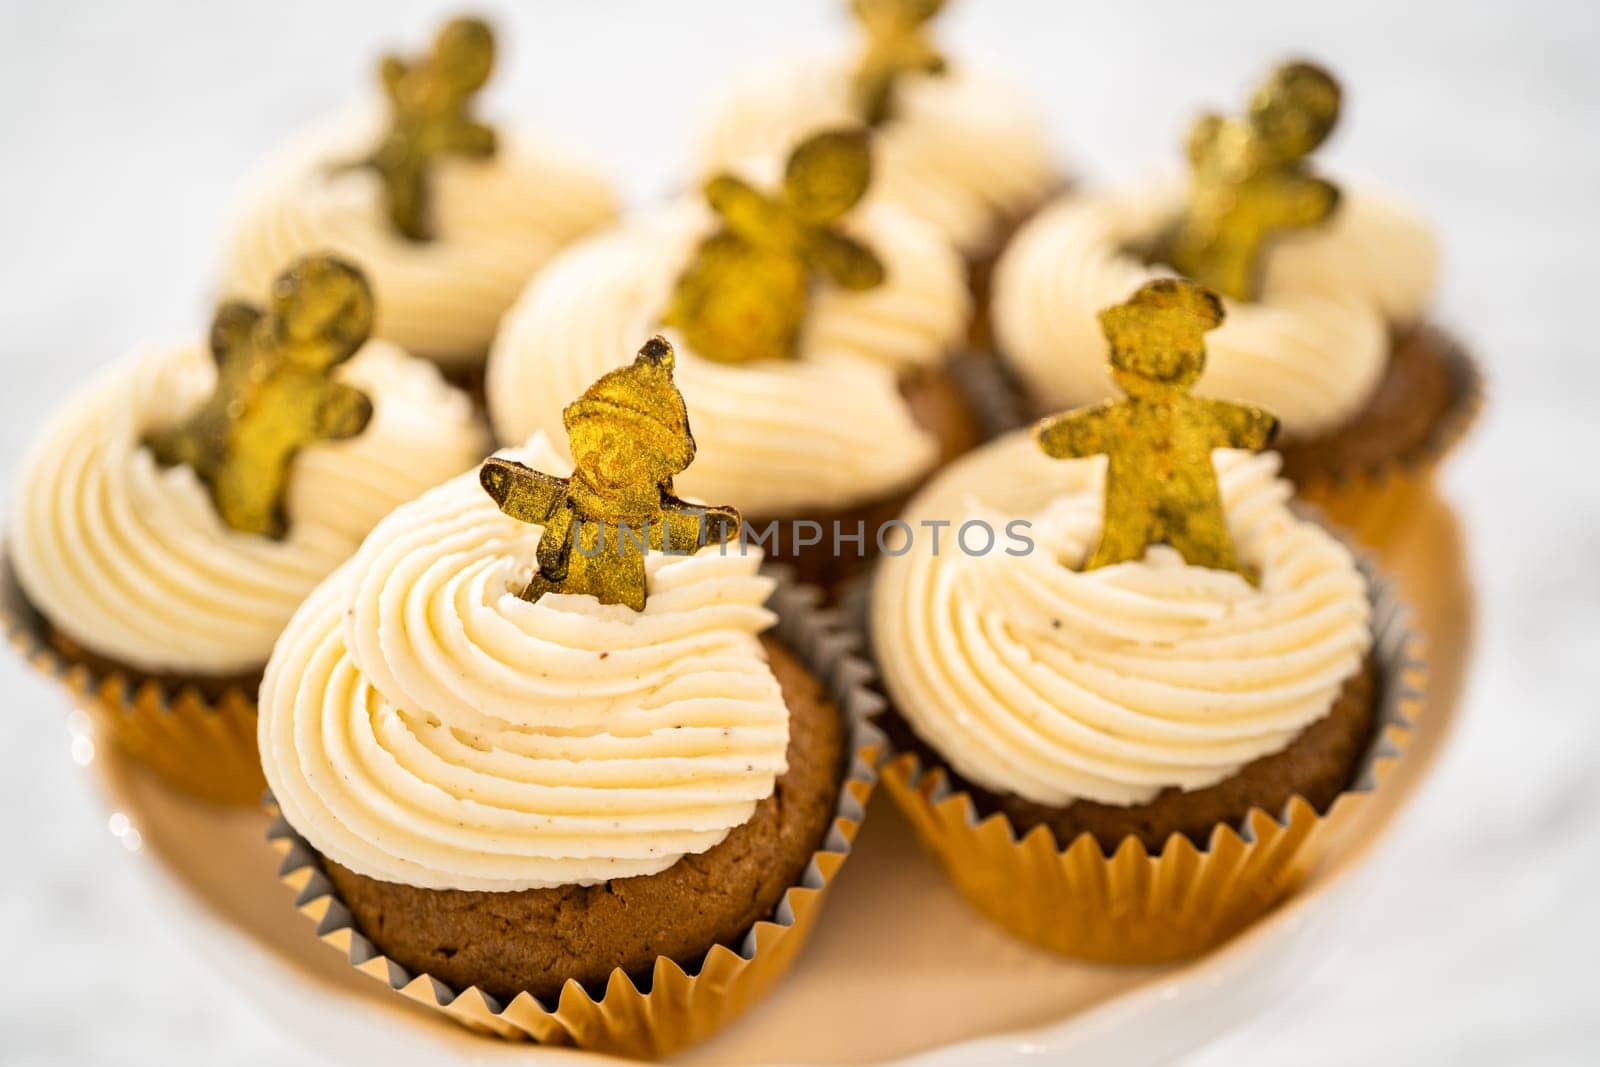 Freshly baked gingerbread cupcakes with eggnog buttercream frosting and topped with a gingerbread man.